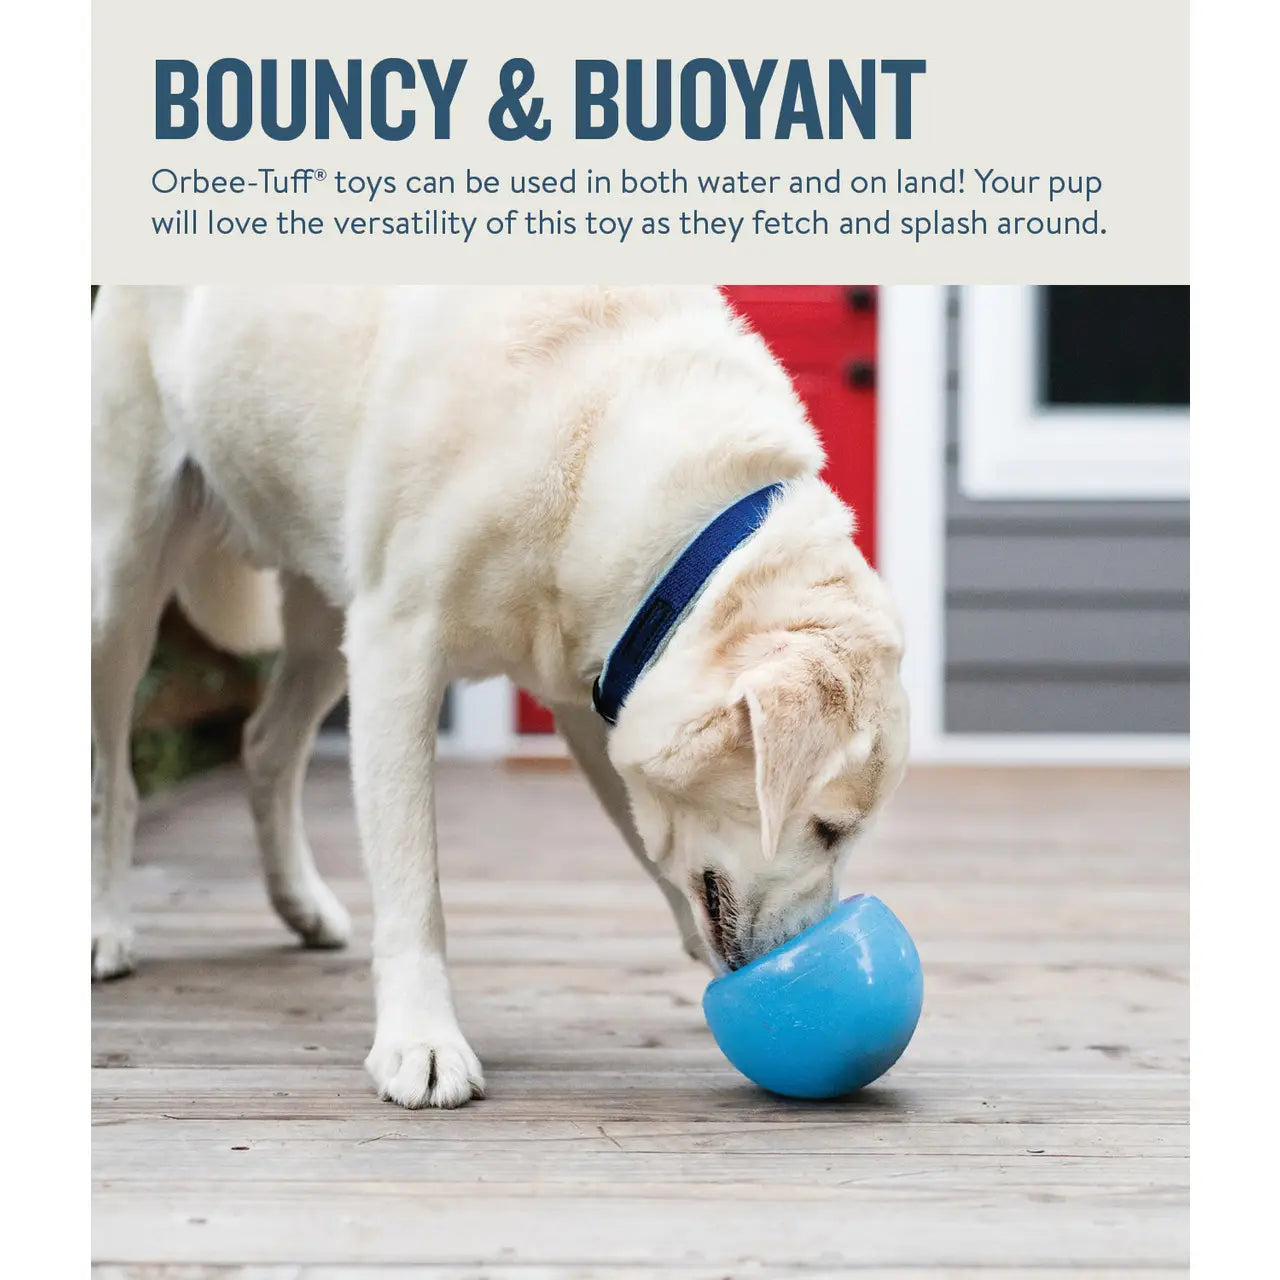 BOUNCY & BUOYANT Orbee-Tuff toys can be used in both water and on land! Your pup will love the versatility of this toy as they fetch and splash around.